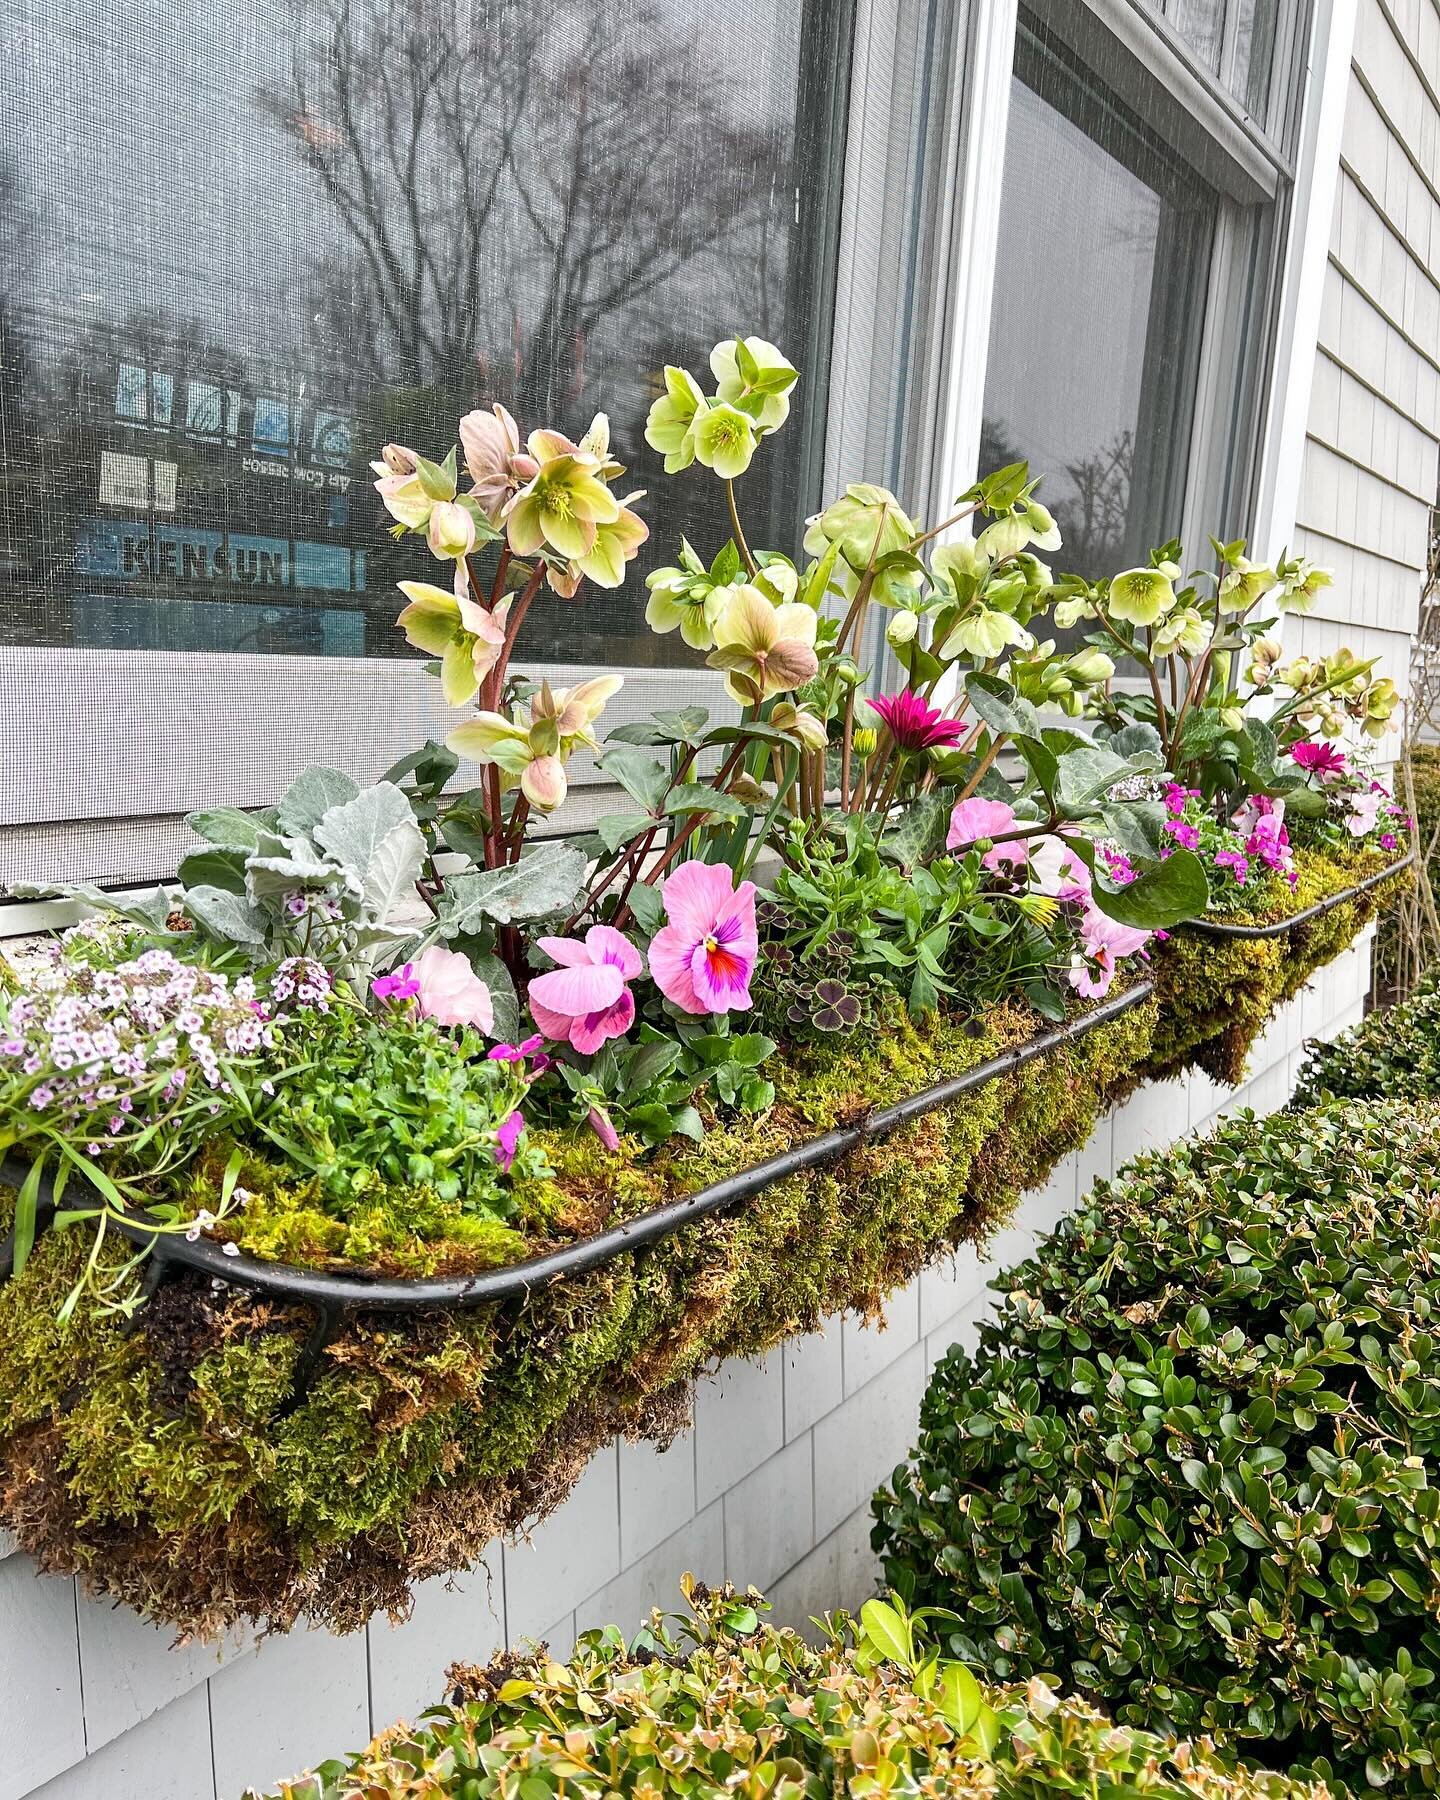 The spring housing market waits for no one, not even Mother Nature!  We are still weeks away from kicking off spring installs but I quickly pulled together some early spring planters for a house hitting the market this week. 

The pops of pink are ju